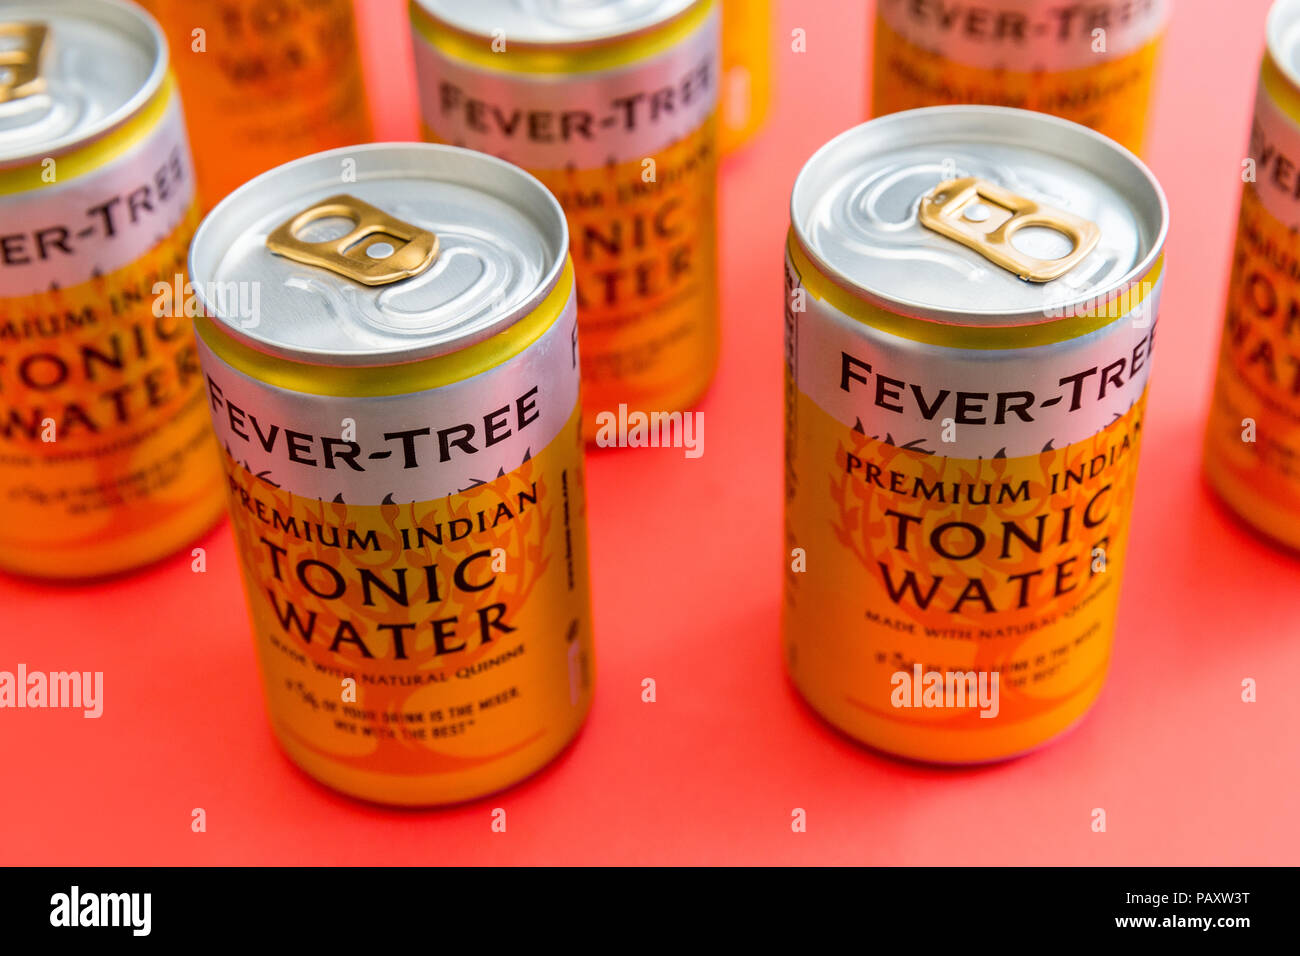 LONDON - July 18, 2018: Fever Tree tonic water cans on red background Stock Photo